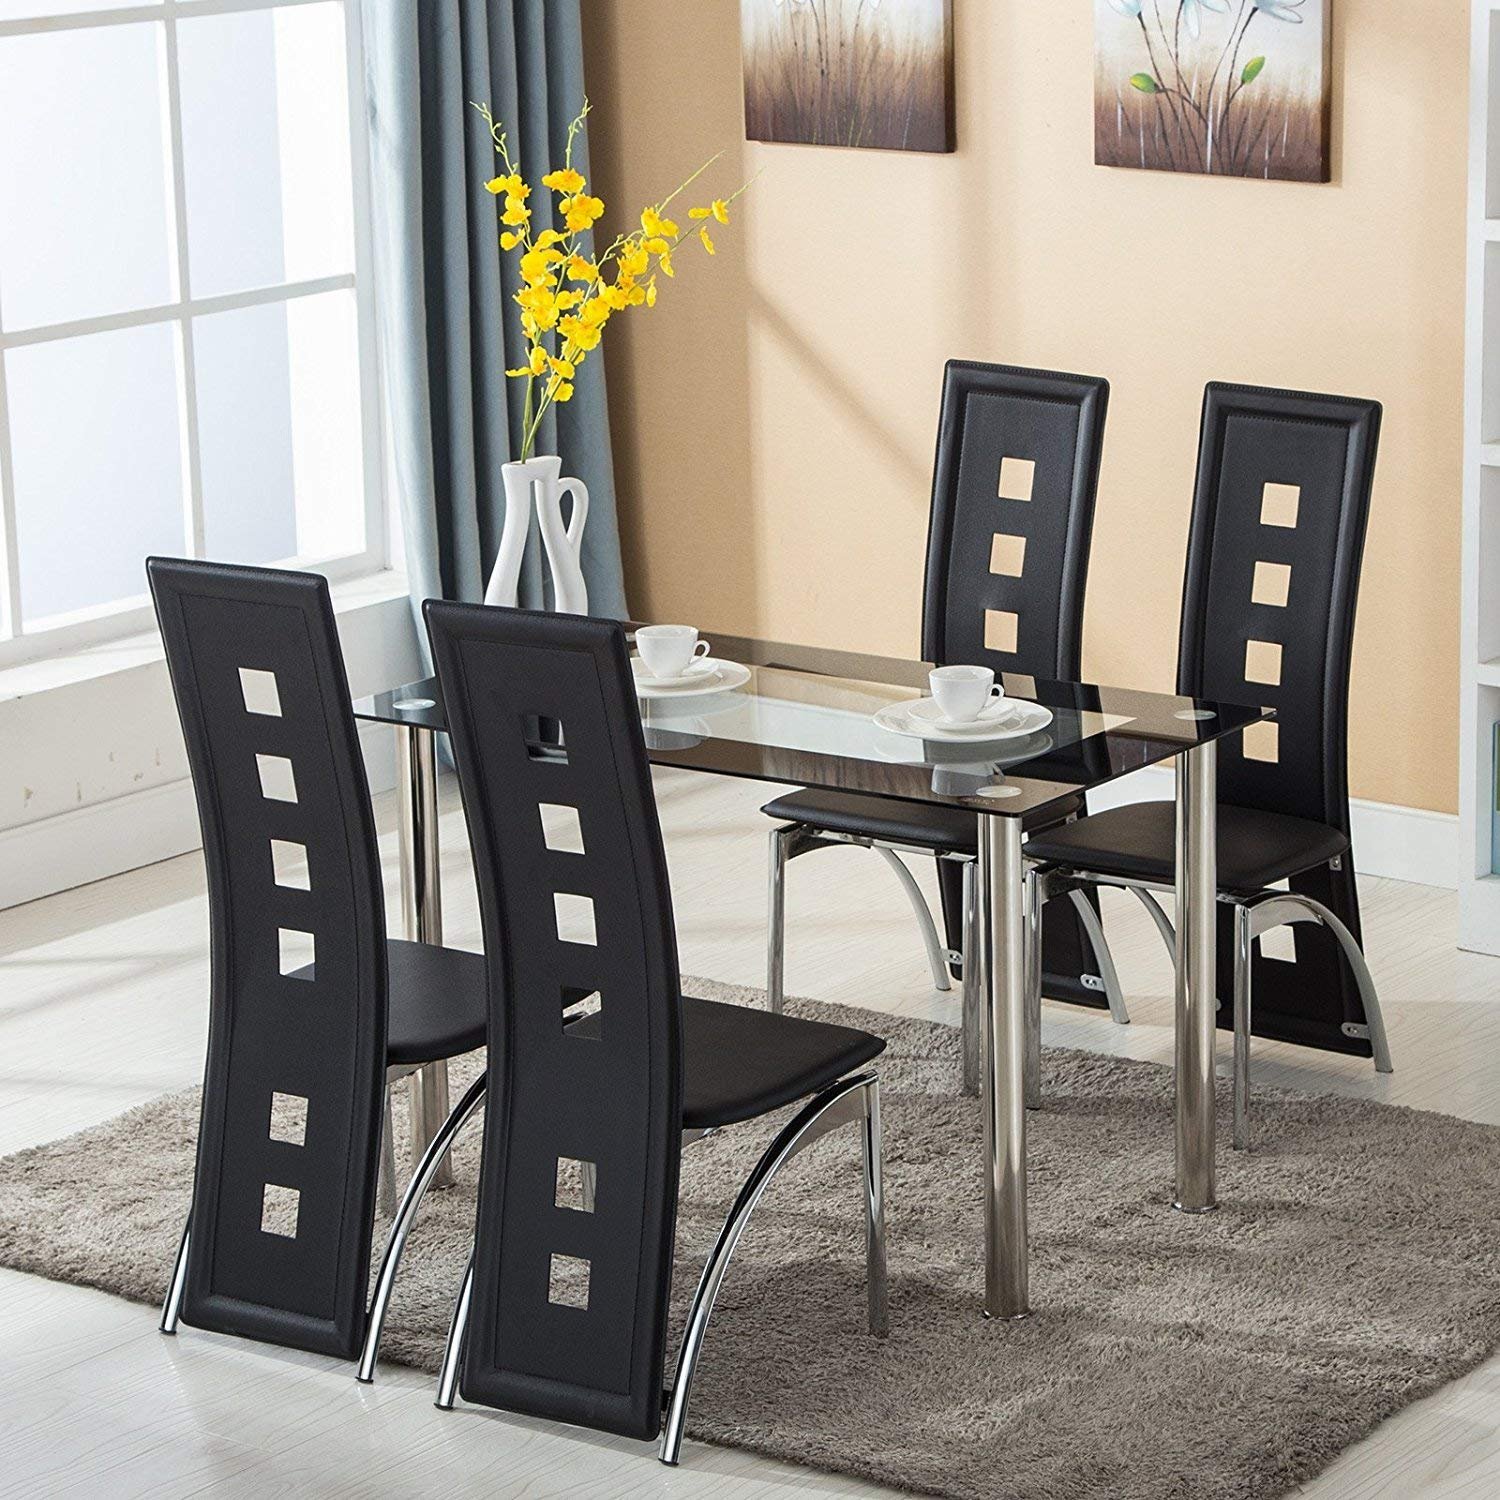 Chairs Set Kitchen Table Furniture, Small Glass Dining Room Table